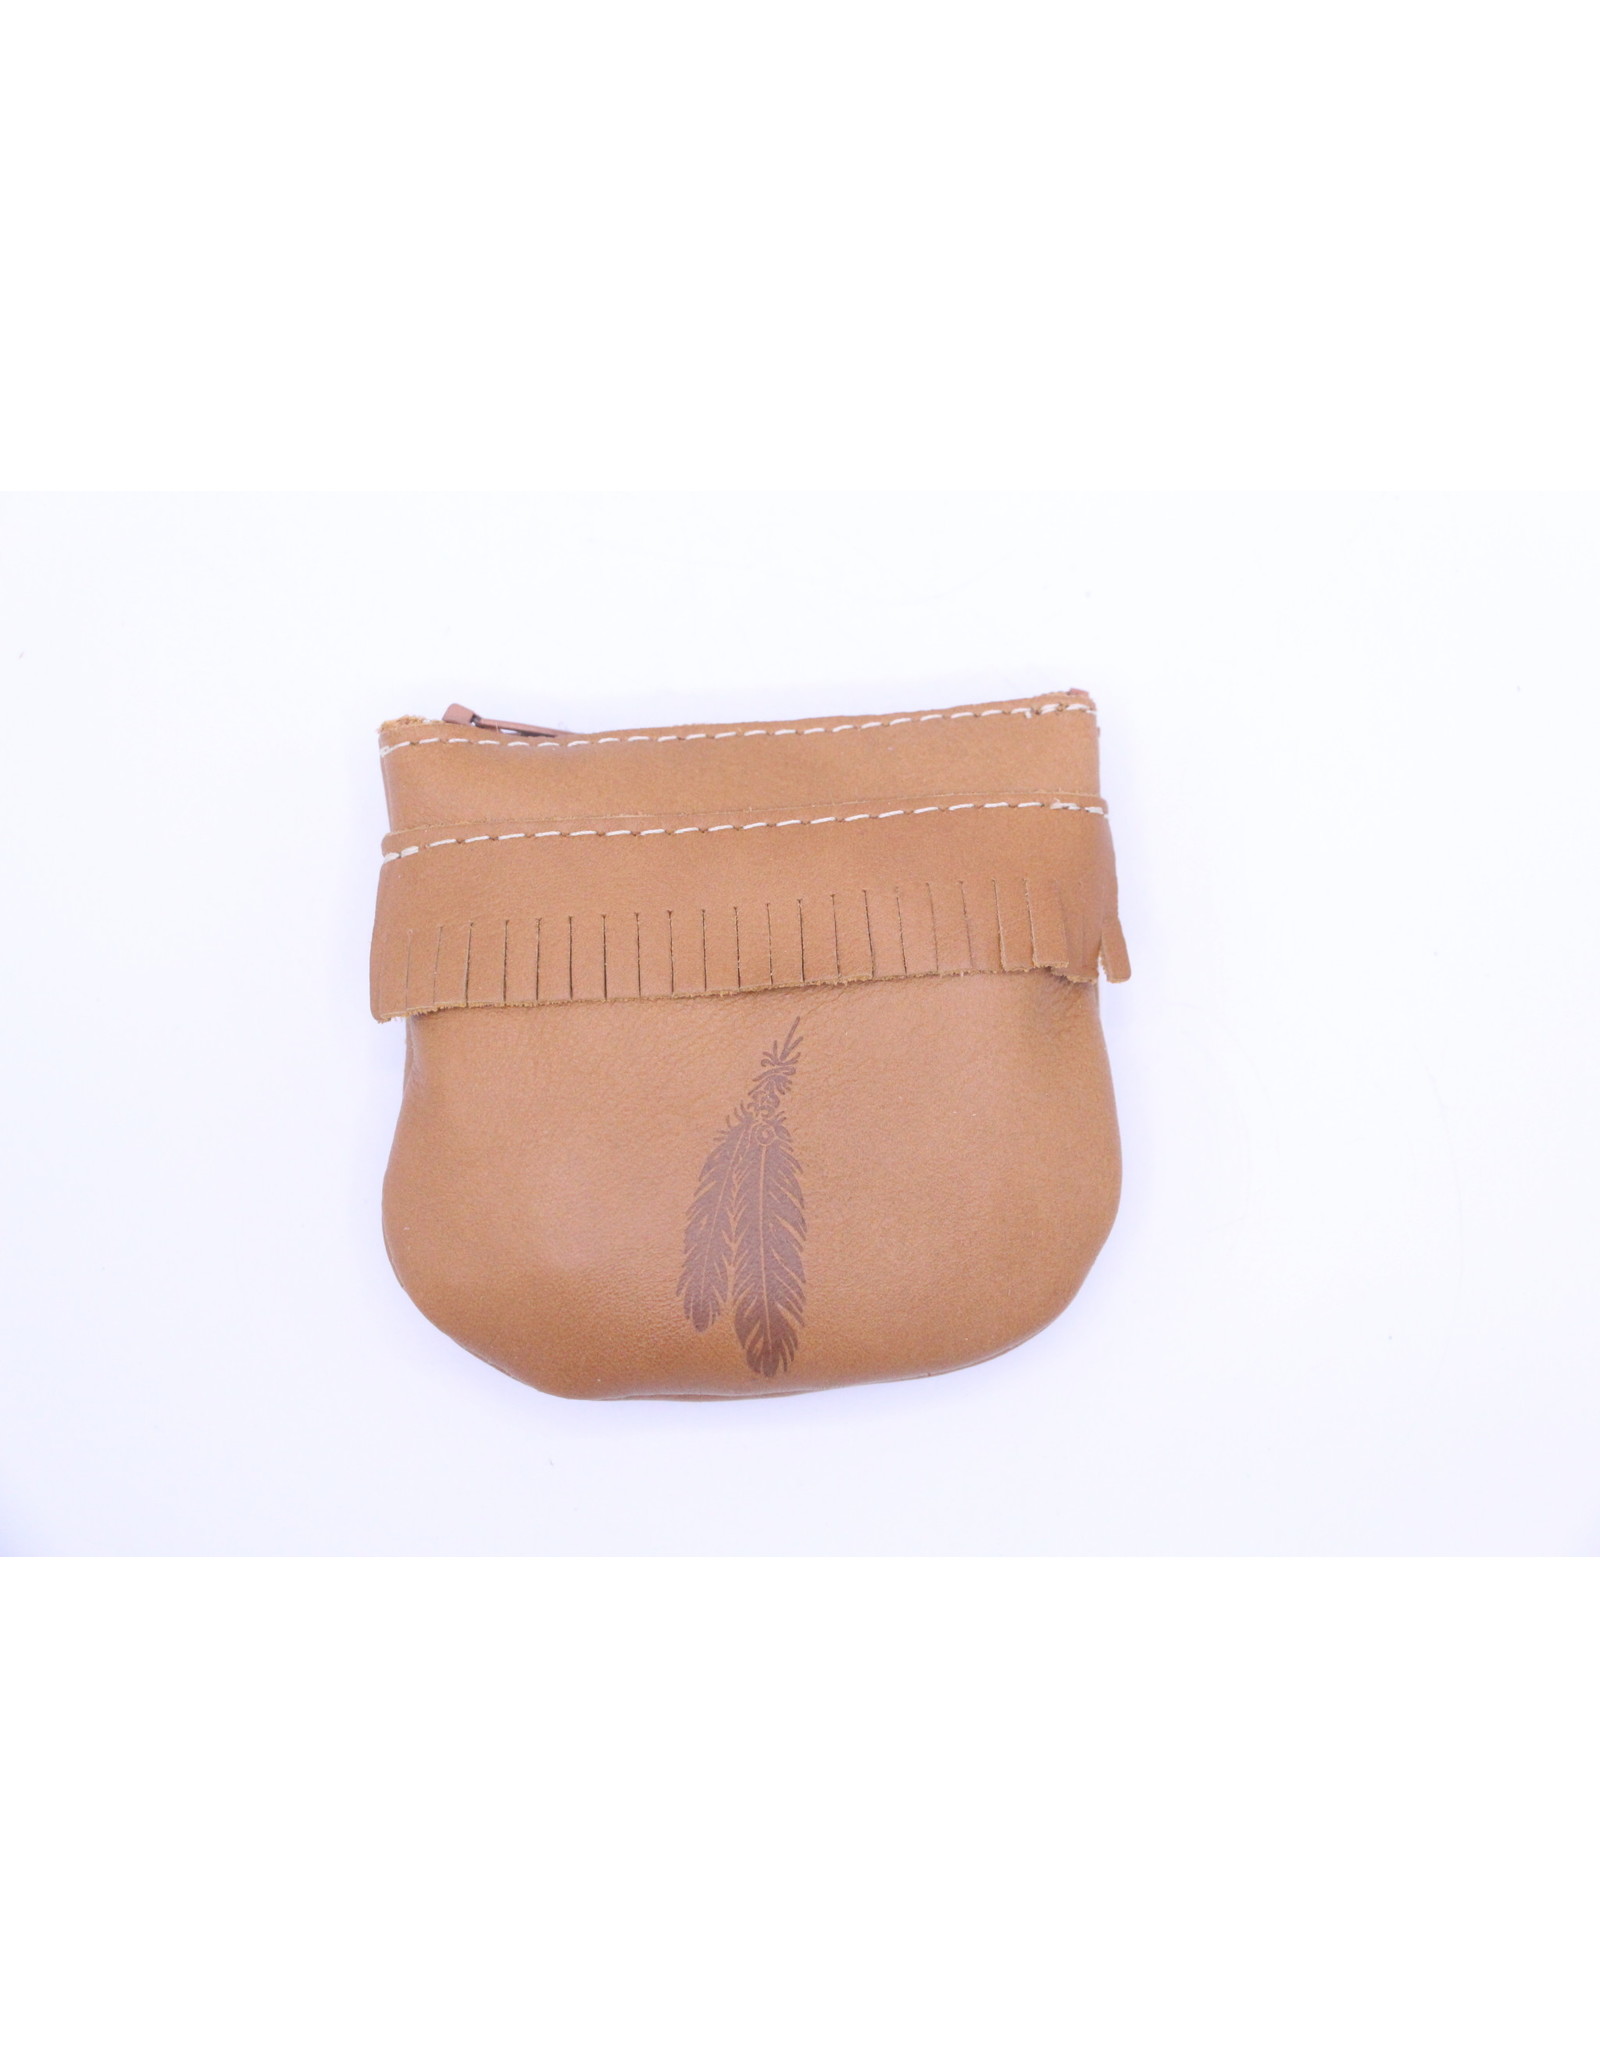 Small Leather Coin Purse 202 Light Brown - Feather